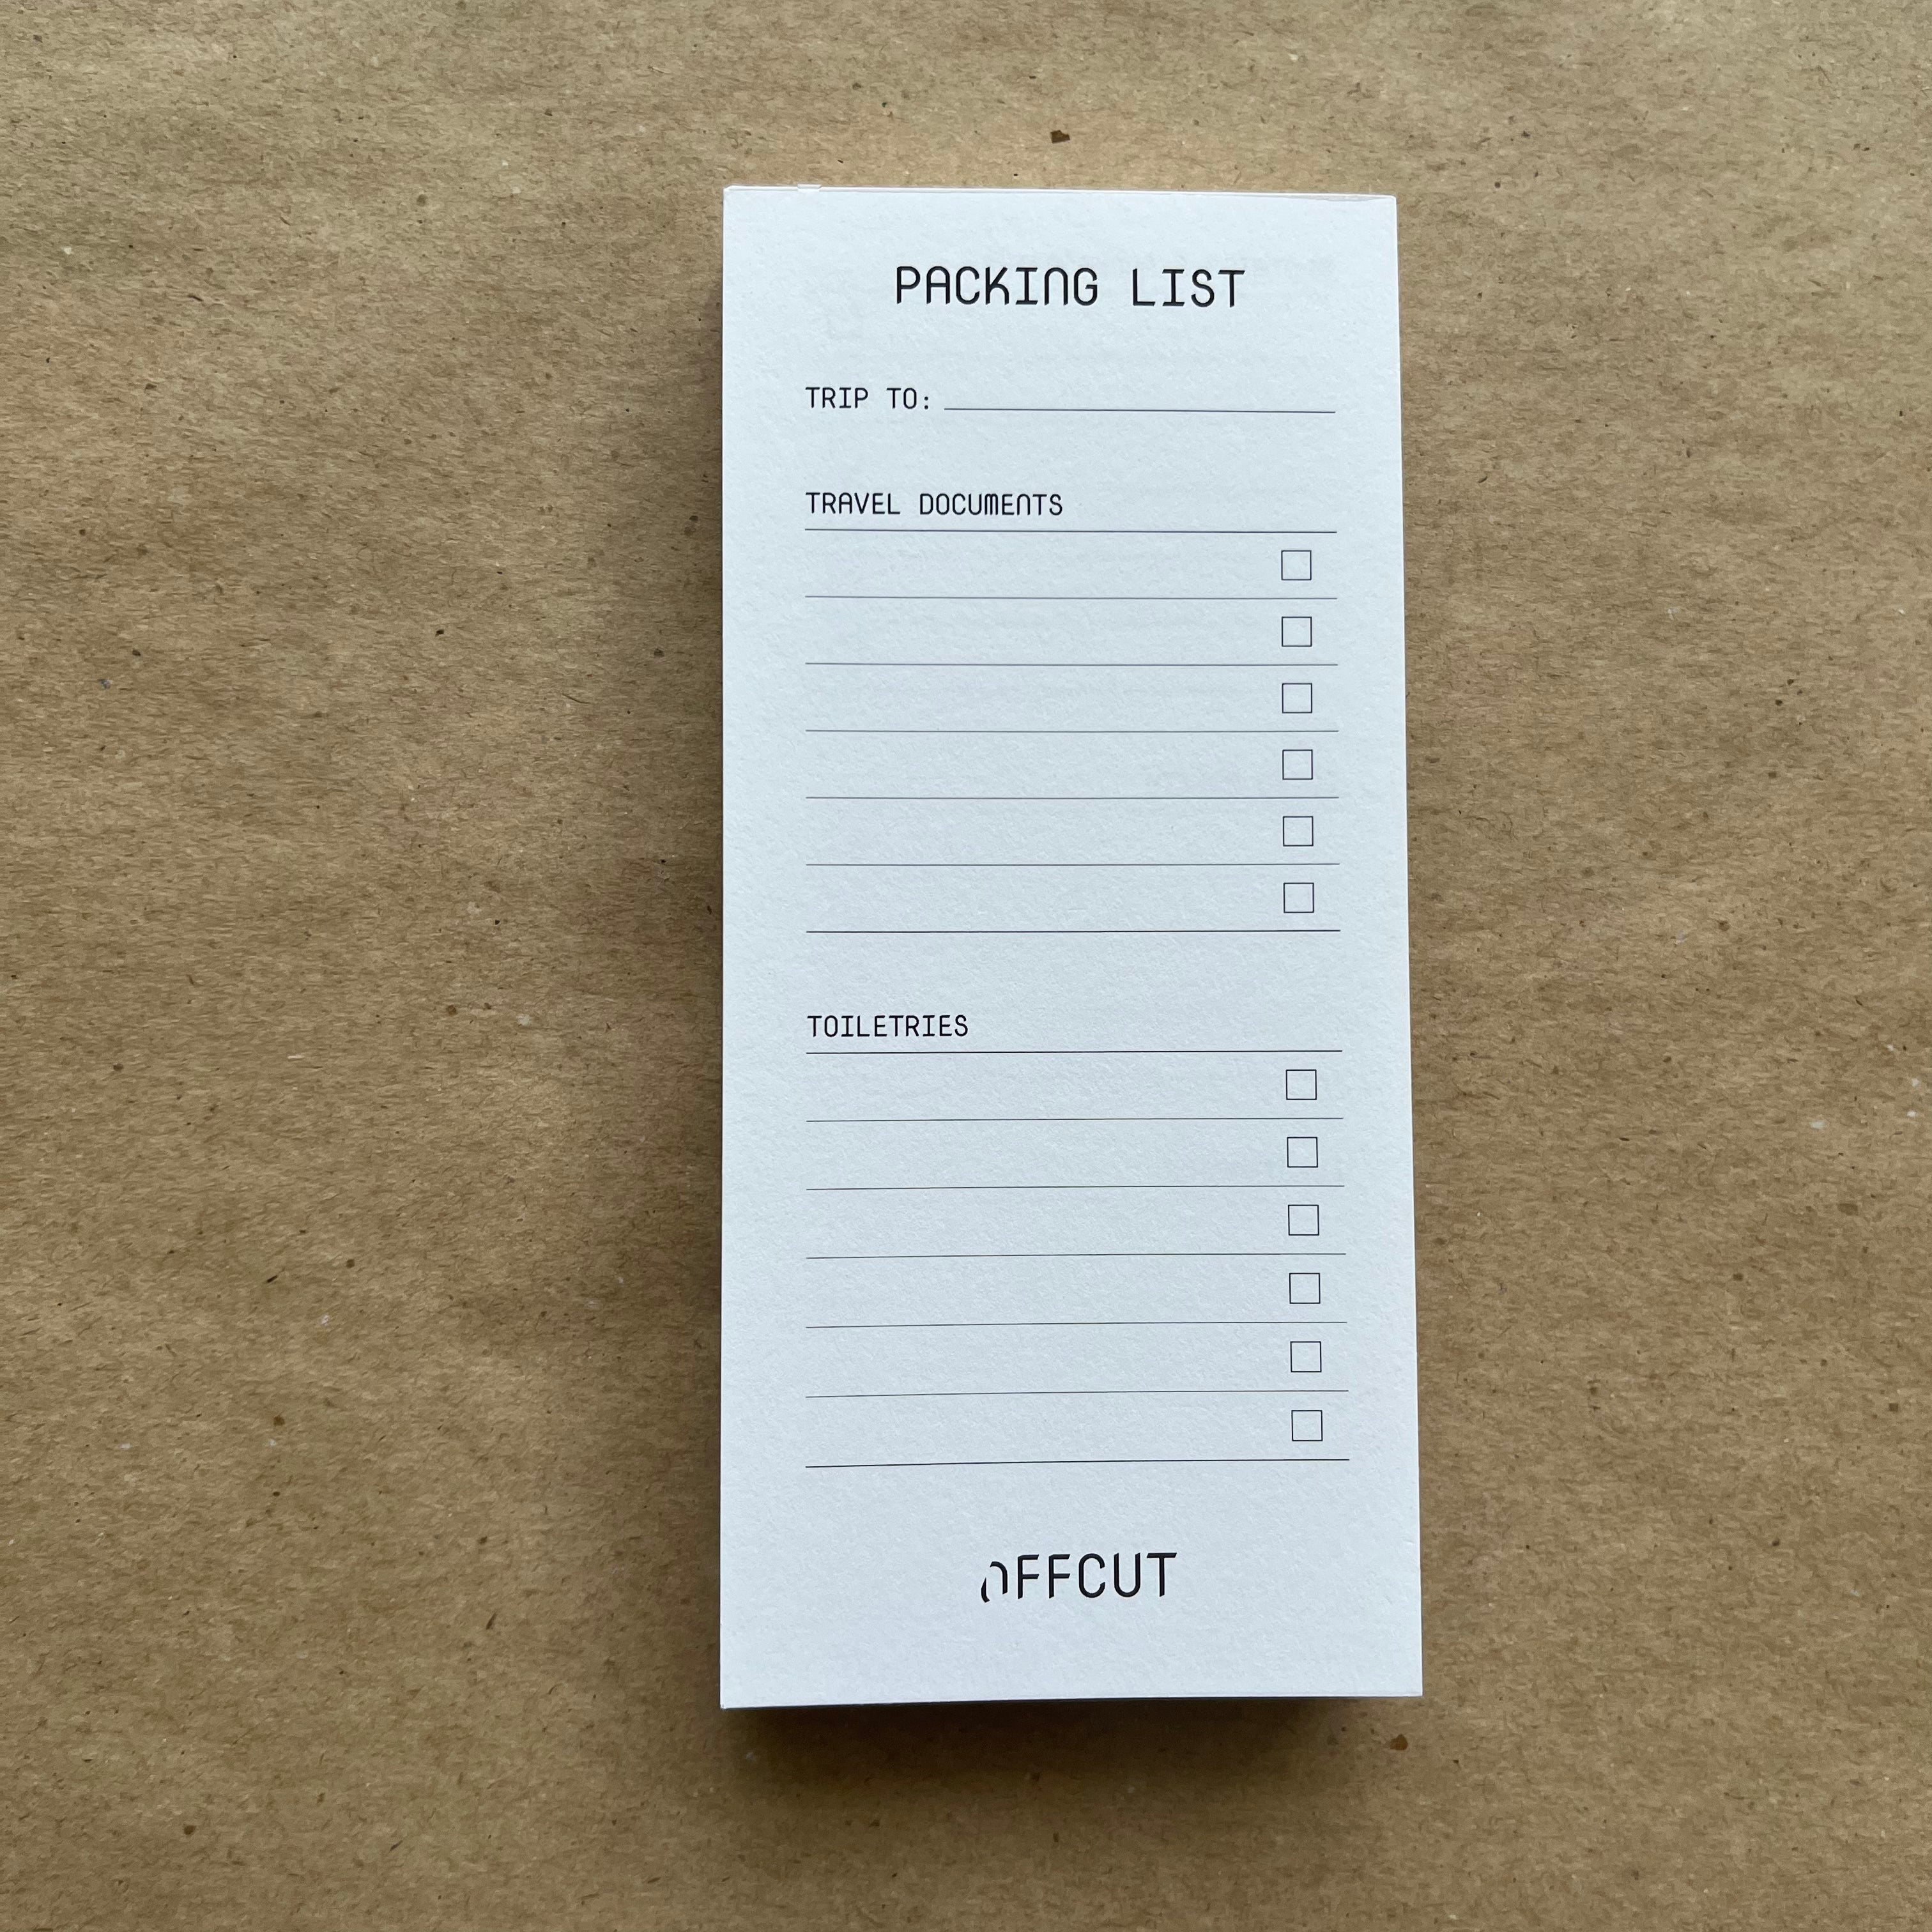 Packing List by OFFCUT